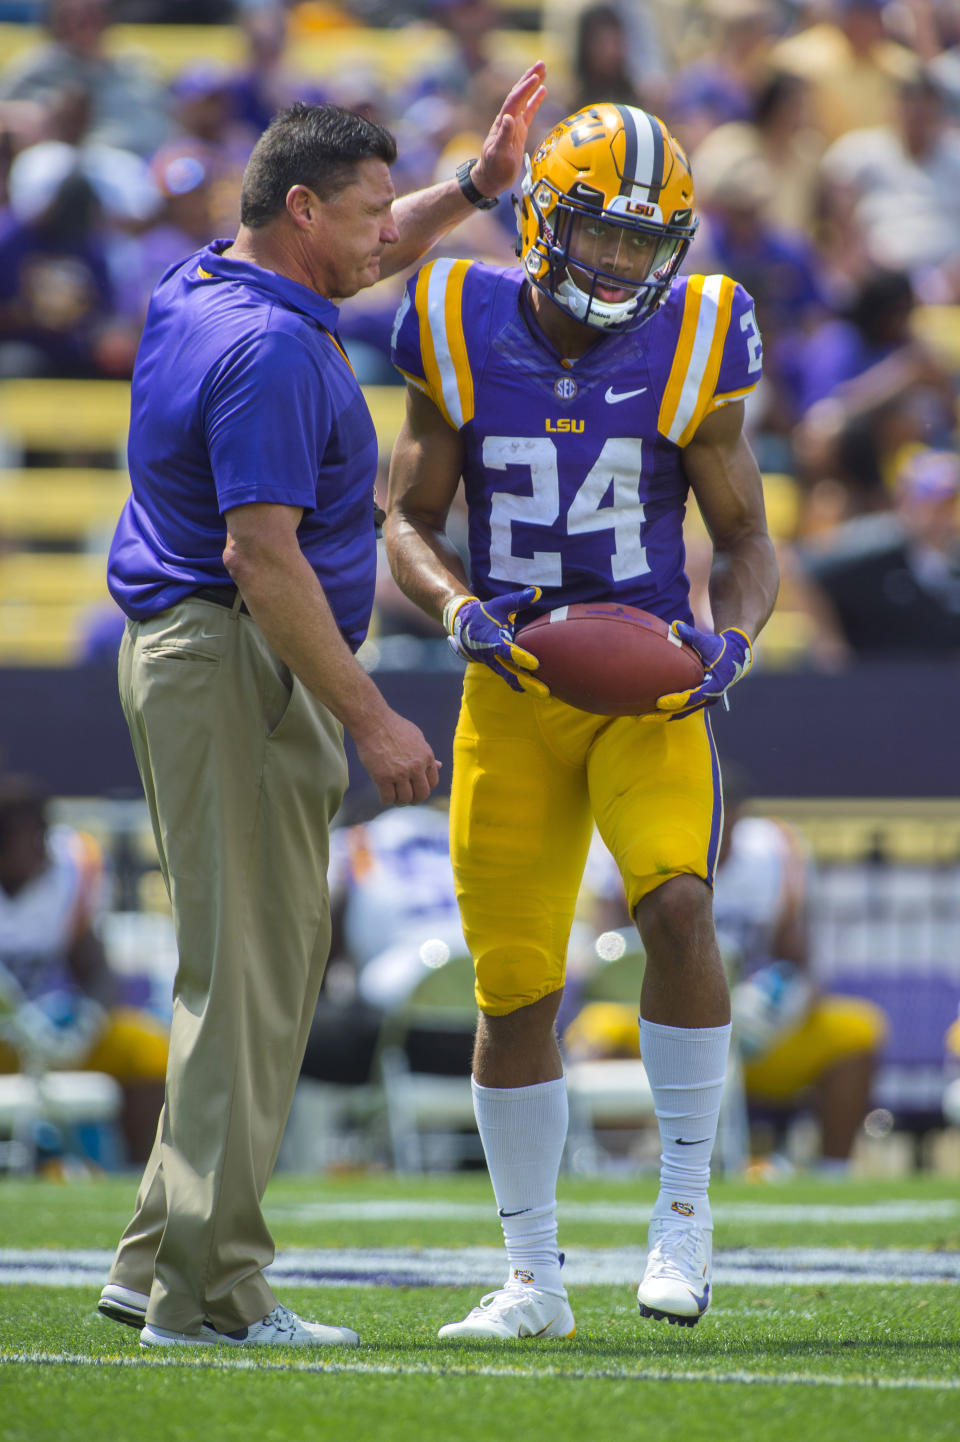 FILE - In this April 6,2019, file photo, LSU coach Ed Orgeron, left, gives freshman cornerback Derek Stingley Jr. (24) a pat on the head after talking with him briefly after Stingley fielded a punt during the NCAA college football team's spring scrimmage n Baton Rouge, La. Stingley was the nation’s No. 1 prospect in his class according to Rivals and was rated third according to the 247Sports Composite. Travis Spradling/The Advocate via AP, File)